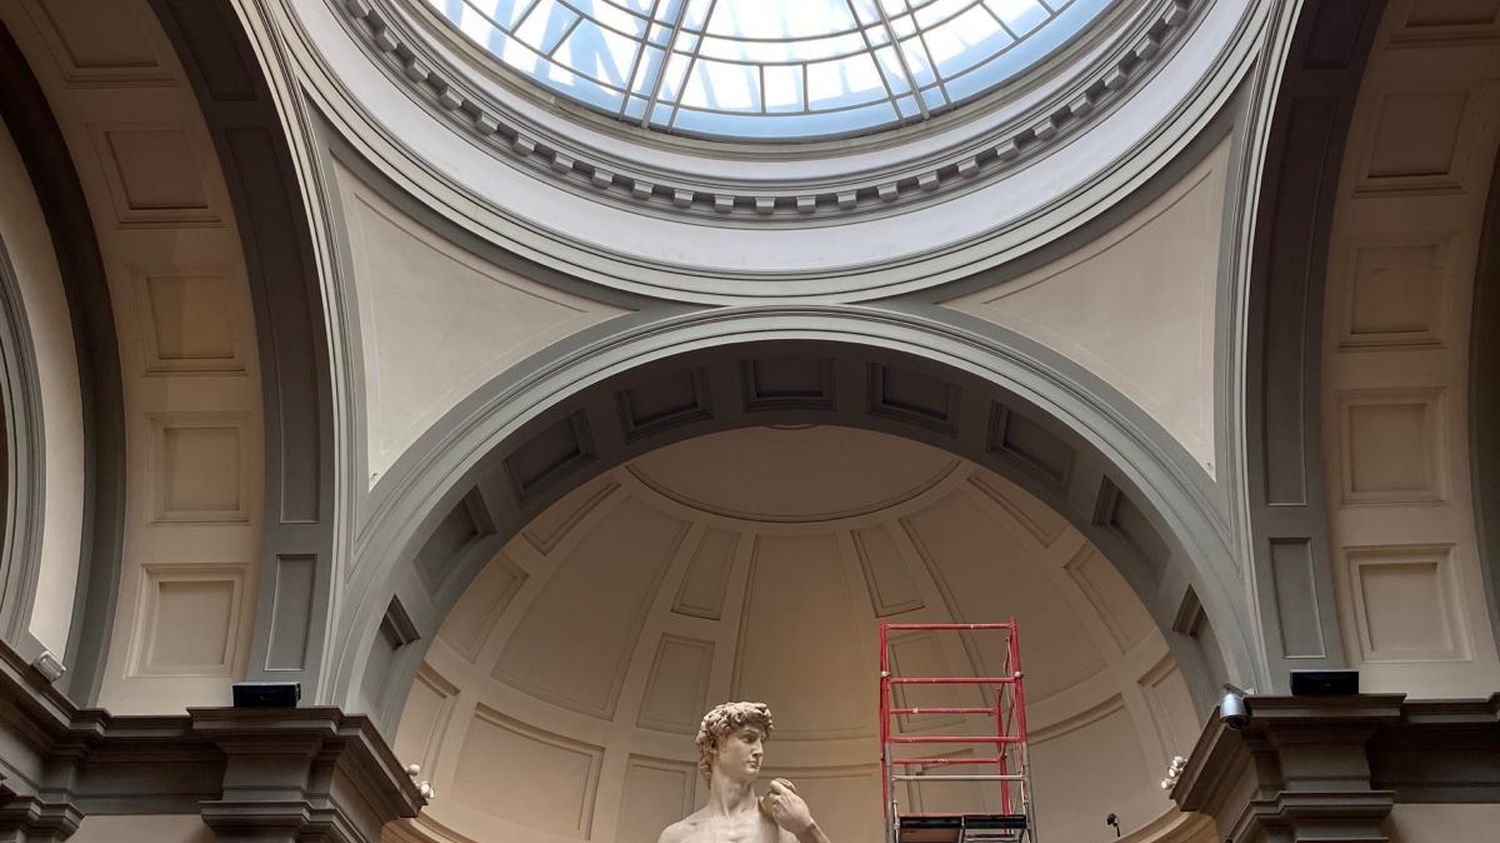 Italy: in Florence, stunning pictures of the WC of Michelangelo's "David"